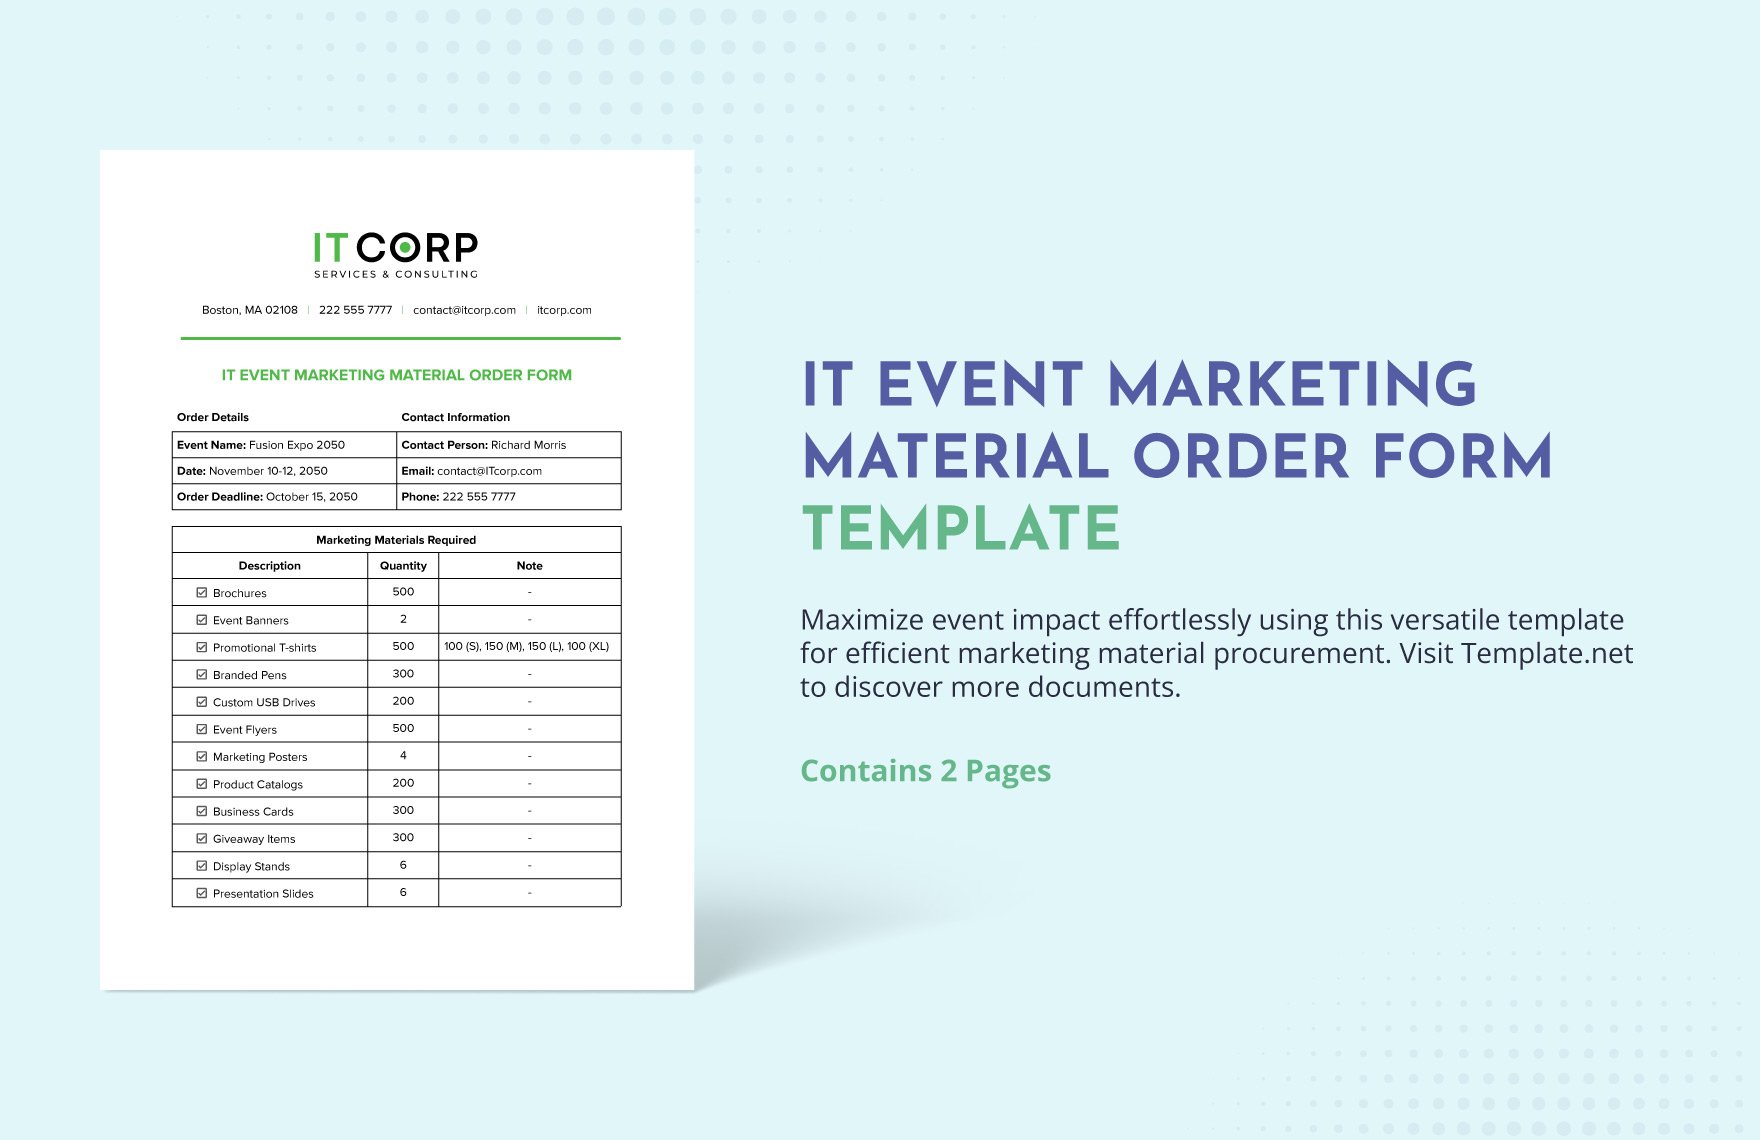 IT Event Marketing Material Order Form Template